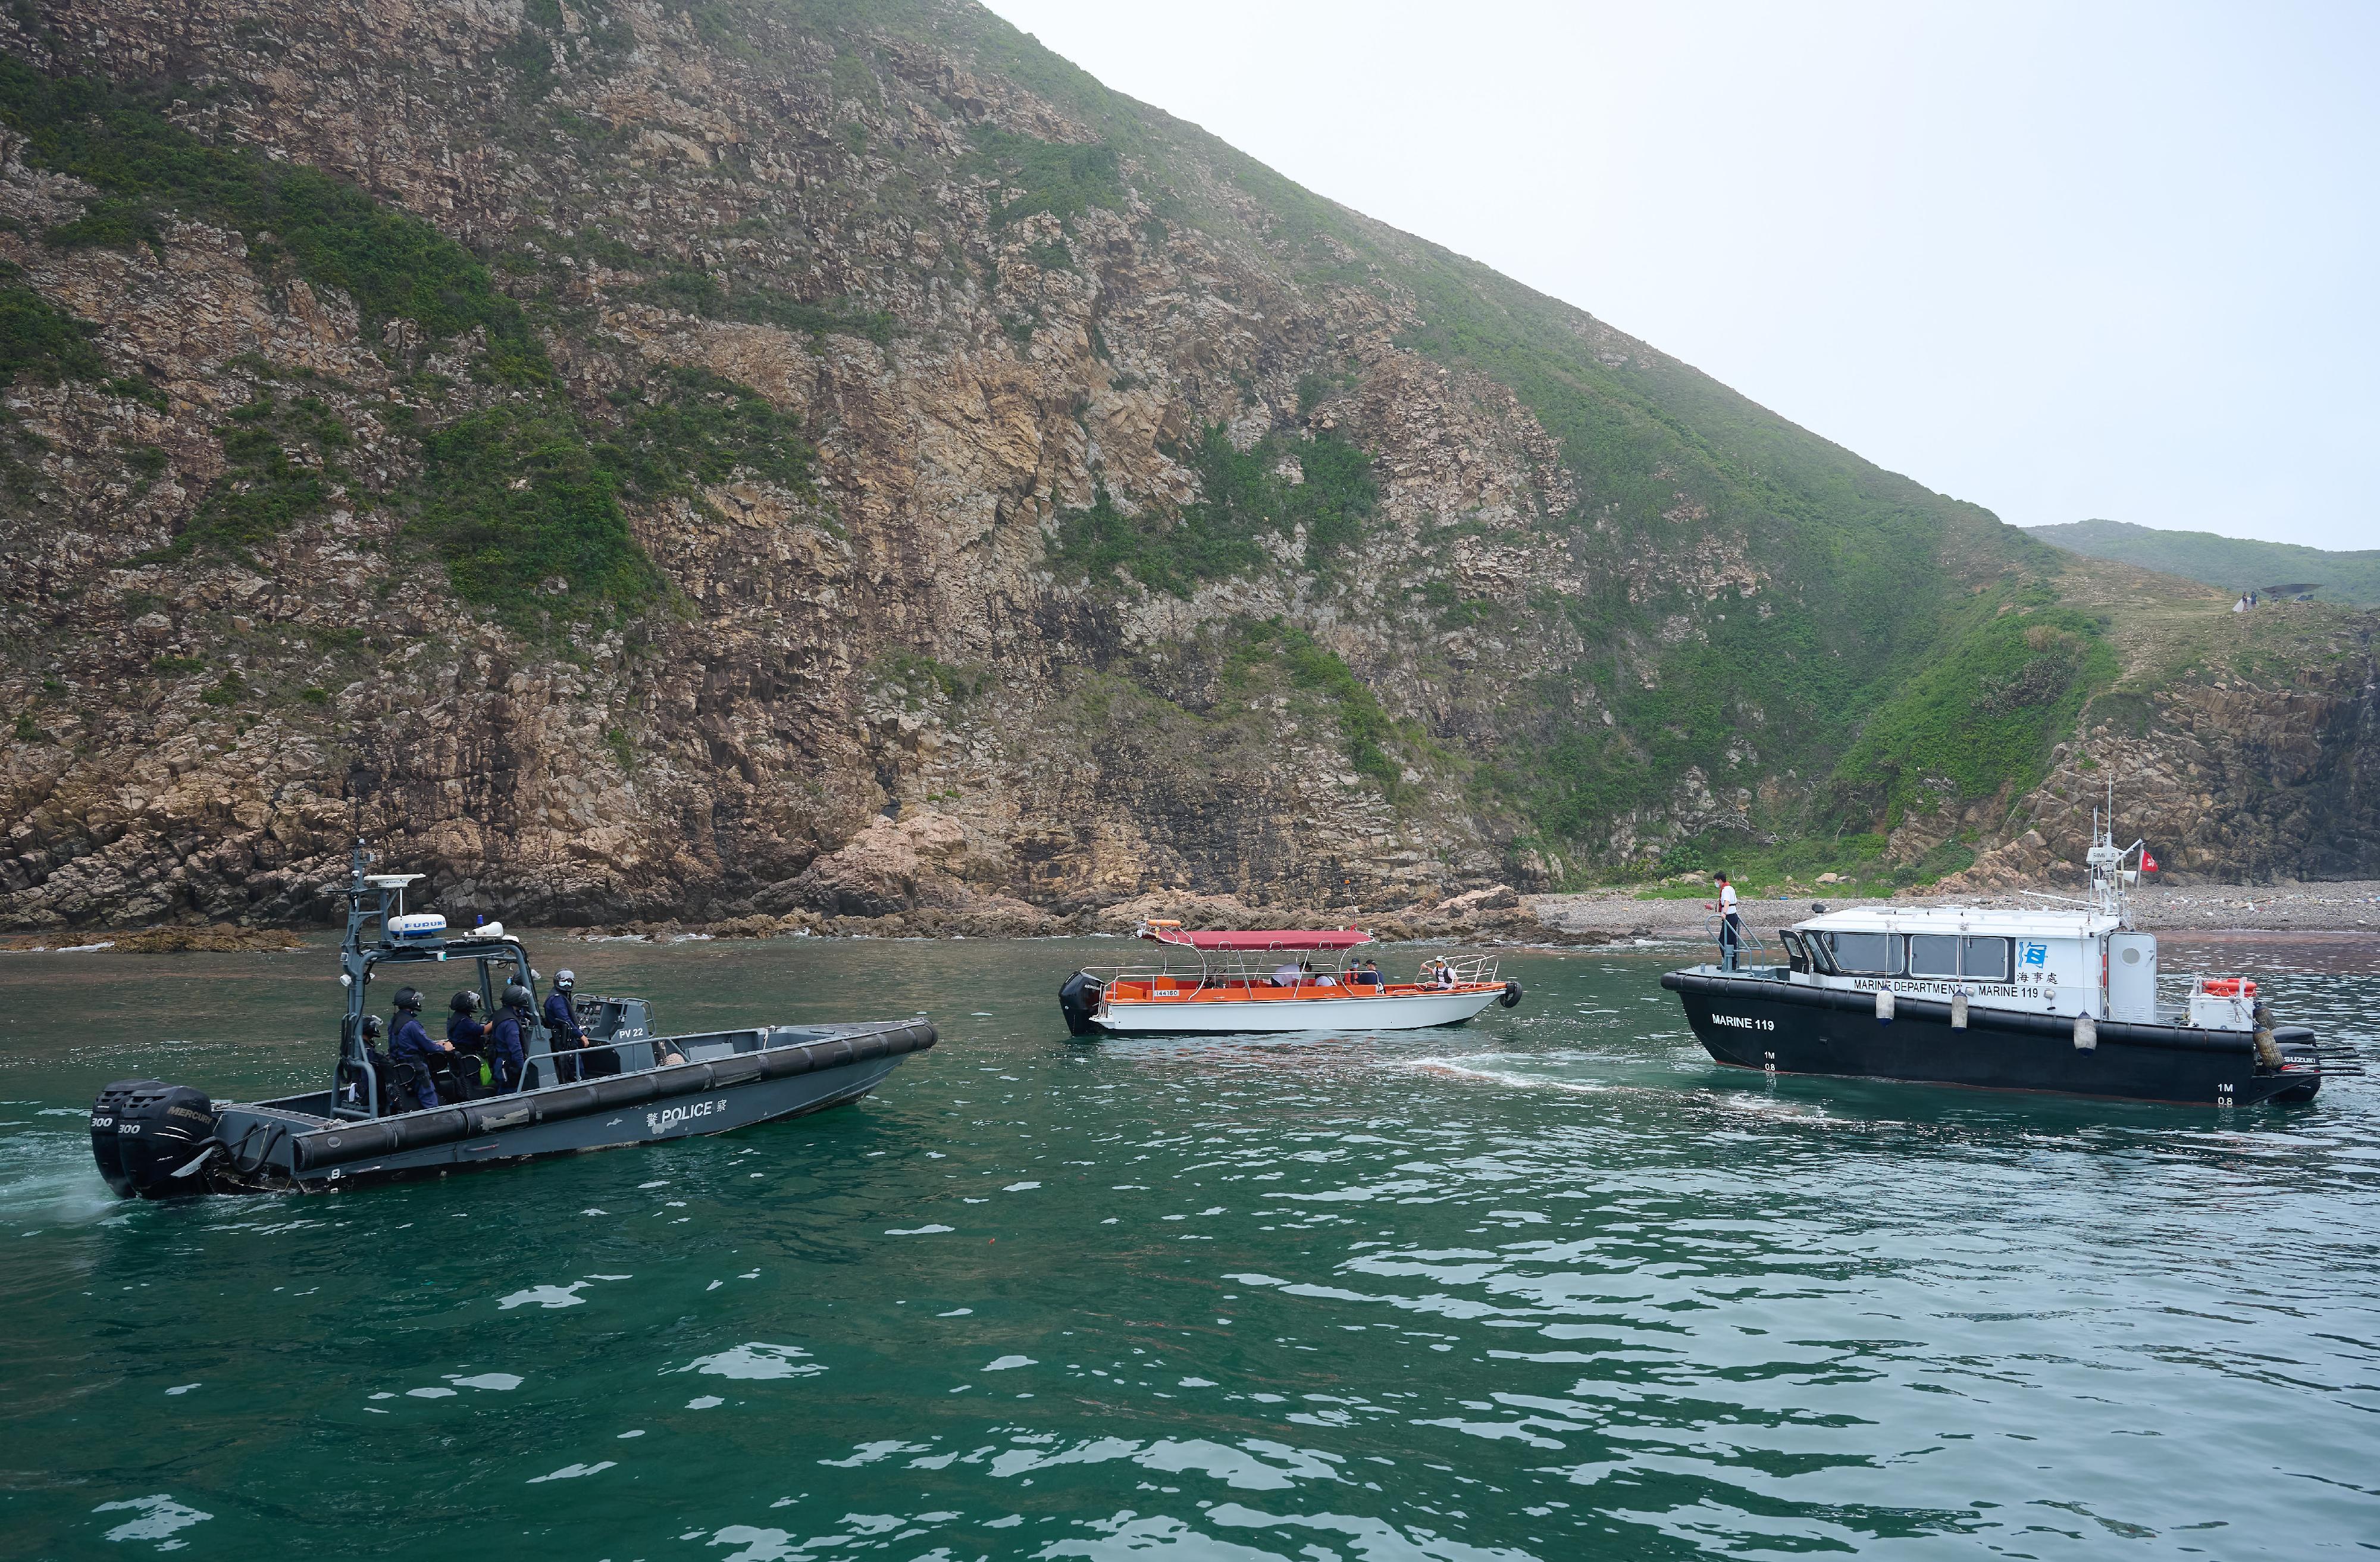 To safeguard navigation safety, apart from conducting daily patrols and law enforcement within Hong Kong waters, the Marine Department (MD) also conducts joint operations with the Marine Police to combat illegal activities including illegal carriage of passengers, speeding, overloading, and violation of licensing conditions and the relevant marine legislation. Photo shows a recent joint operation conducted by the MD and the Marine Police.